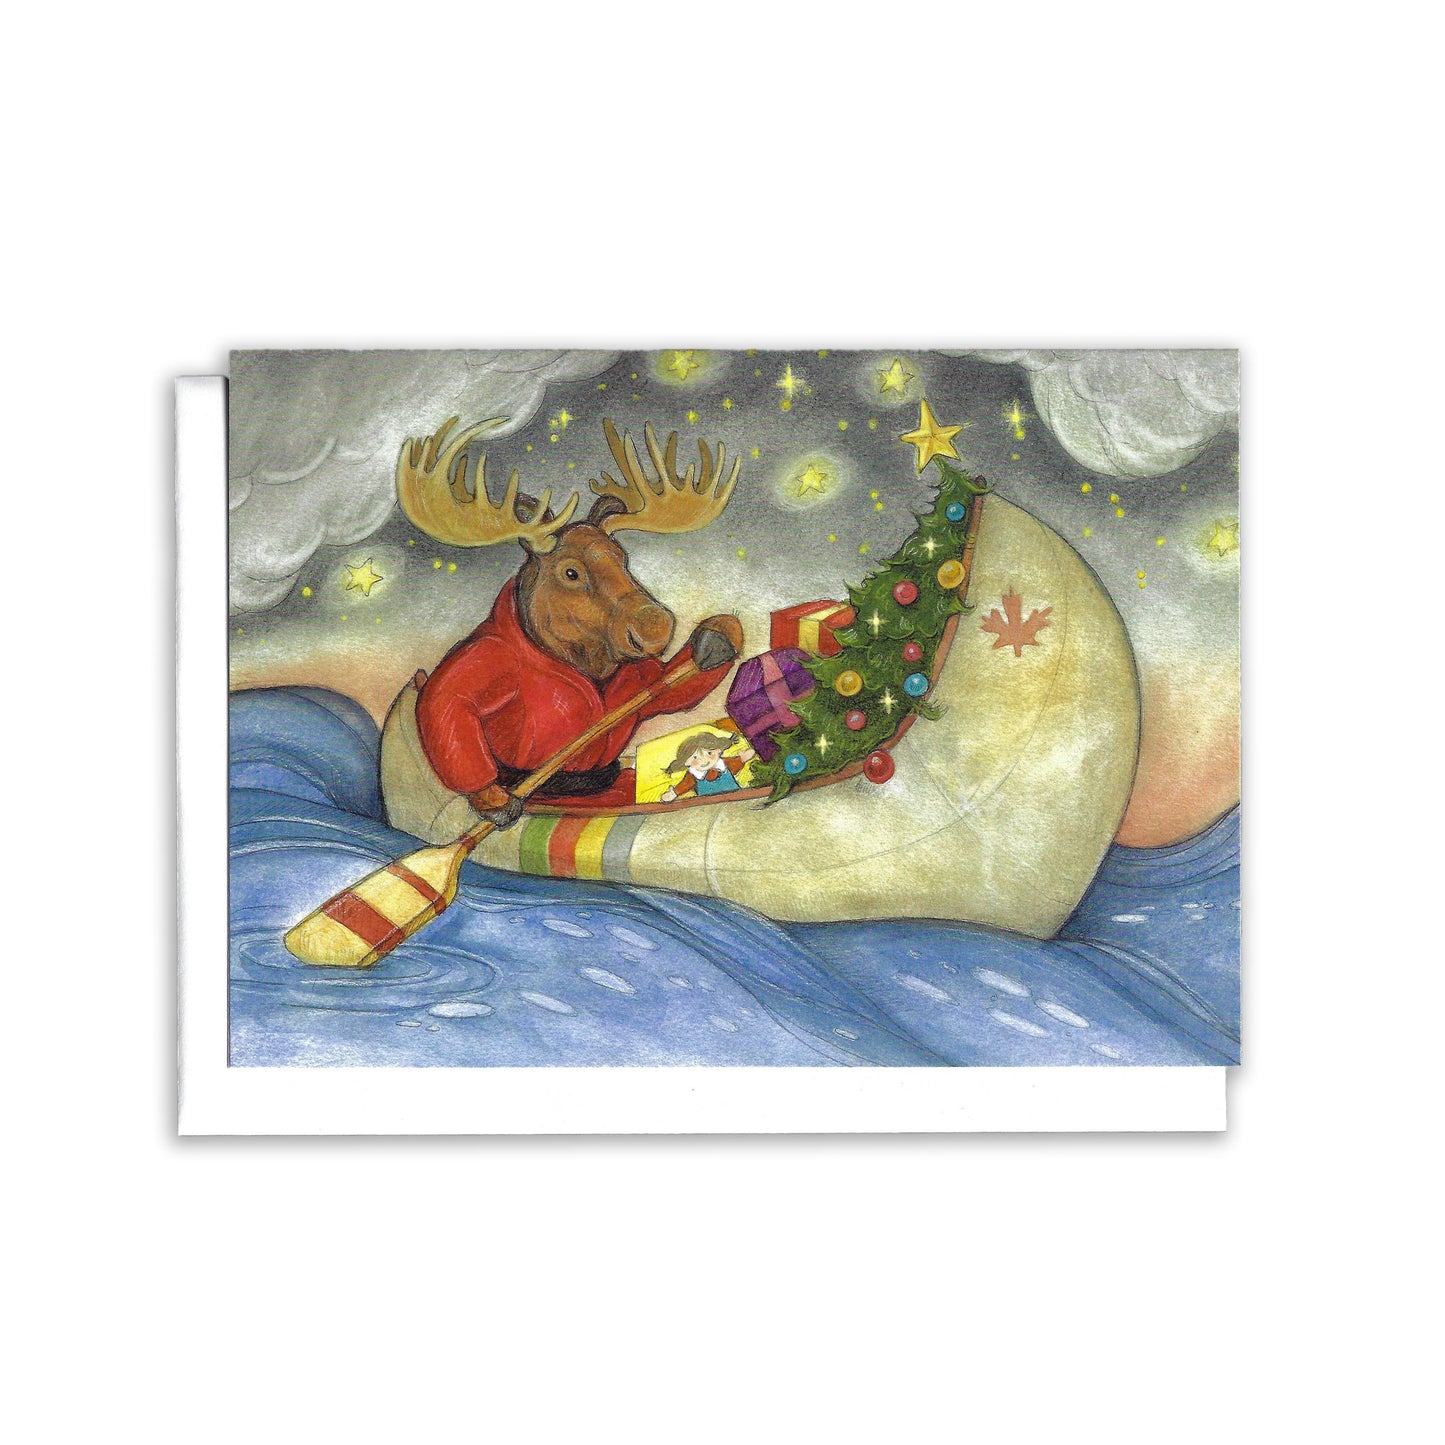 The Christmas Voyage - Greeting Card